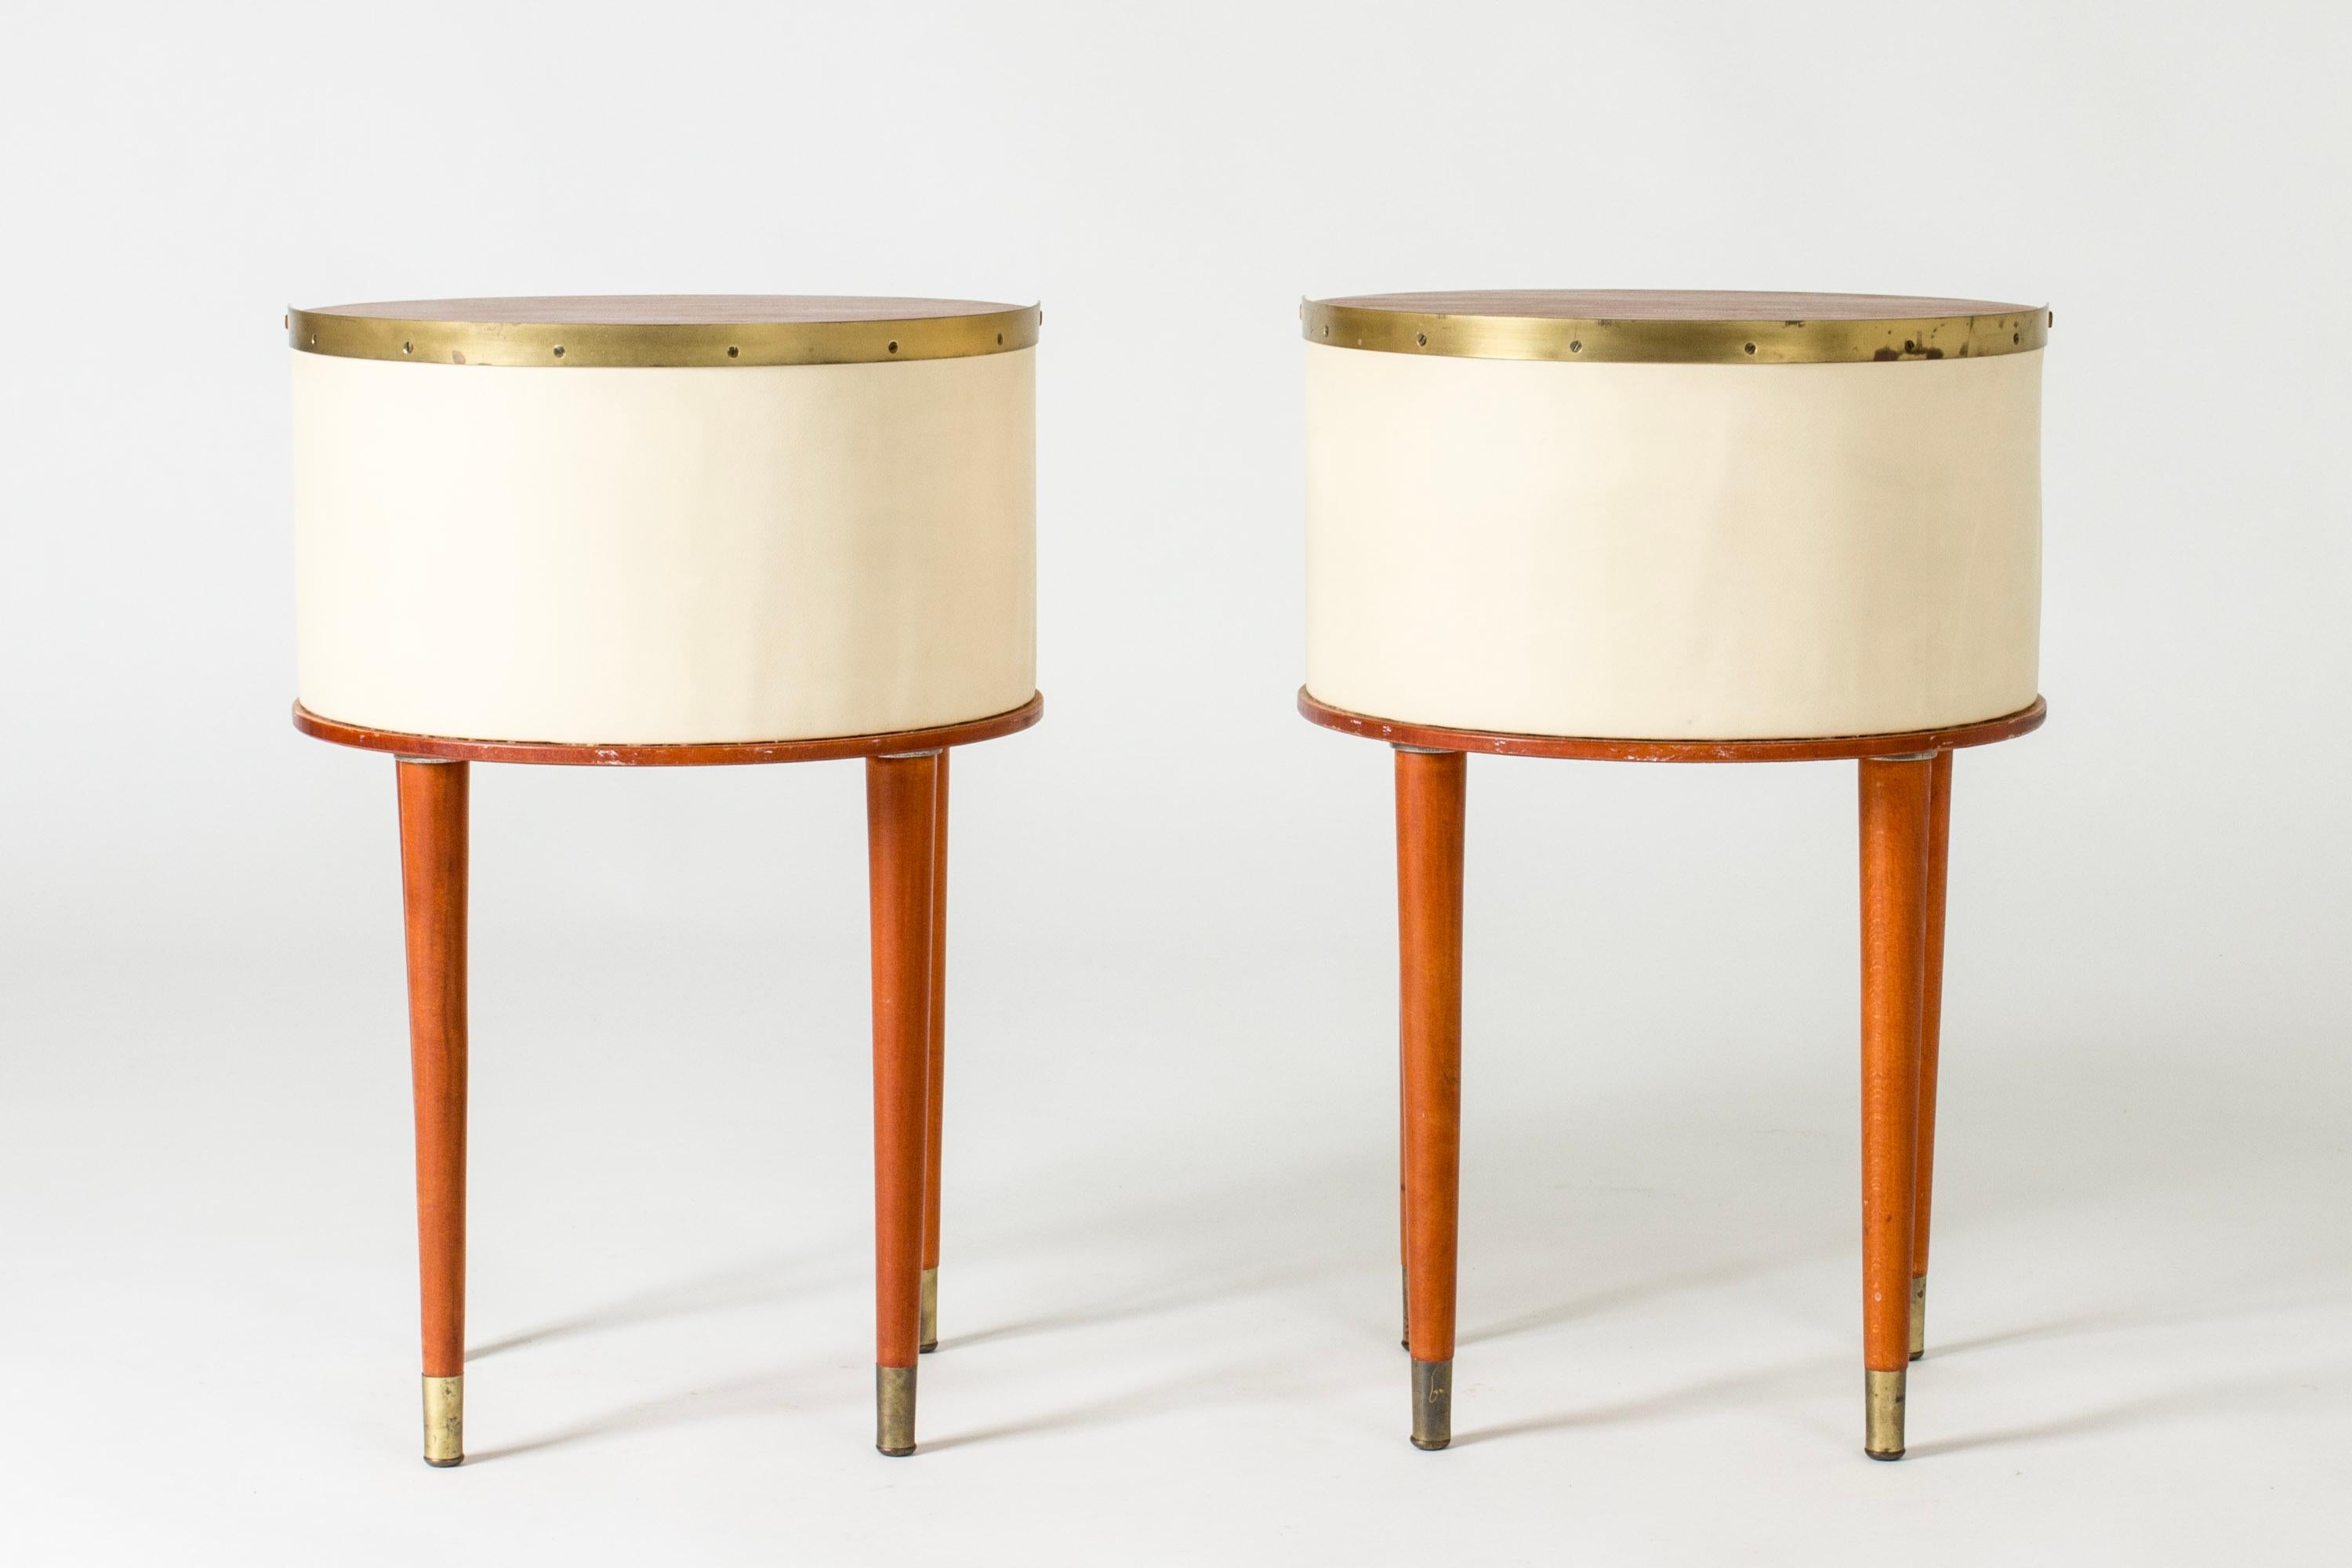 Pair of lovely bedside tables by Halvdan Pettersson. Teak table tops lined with brass rims in half circles, body dressed with faux leather and decorated with brass nails. Beech legs with brass feet.